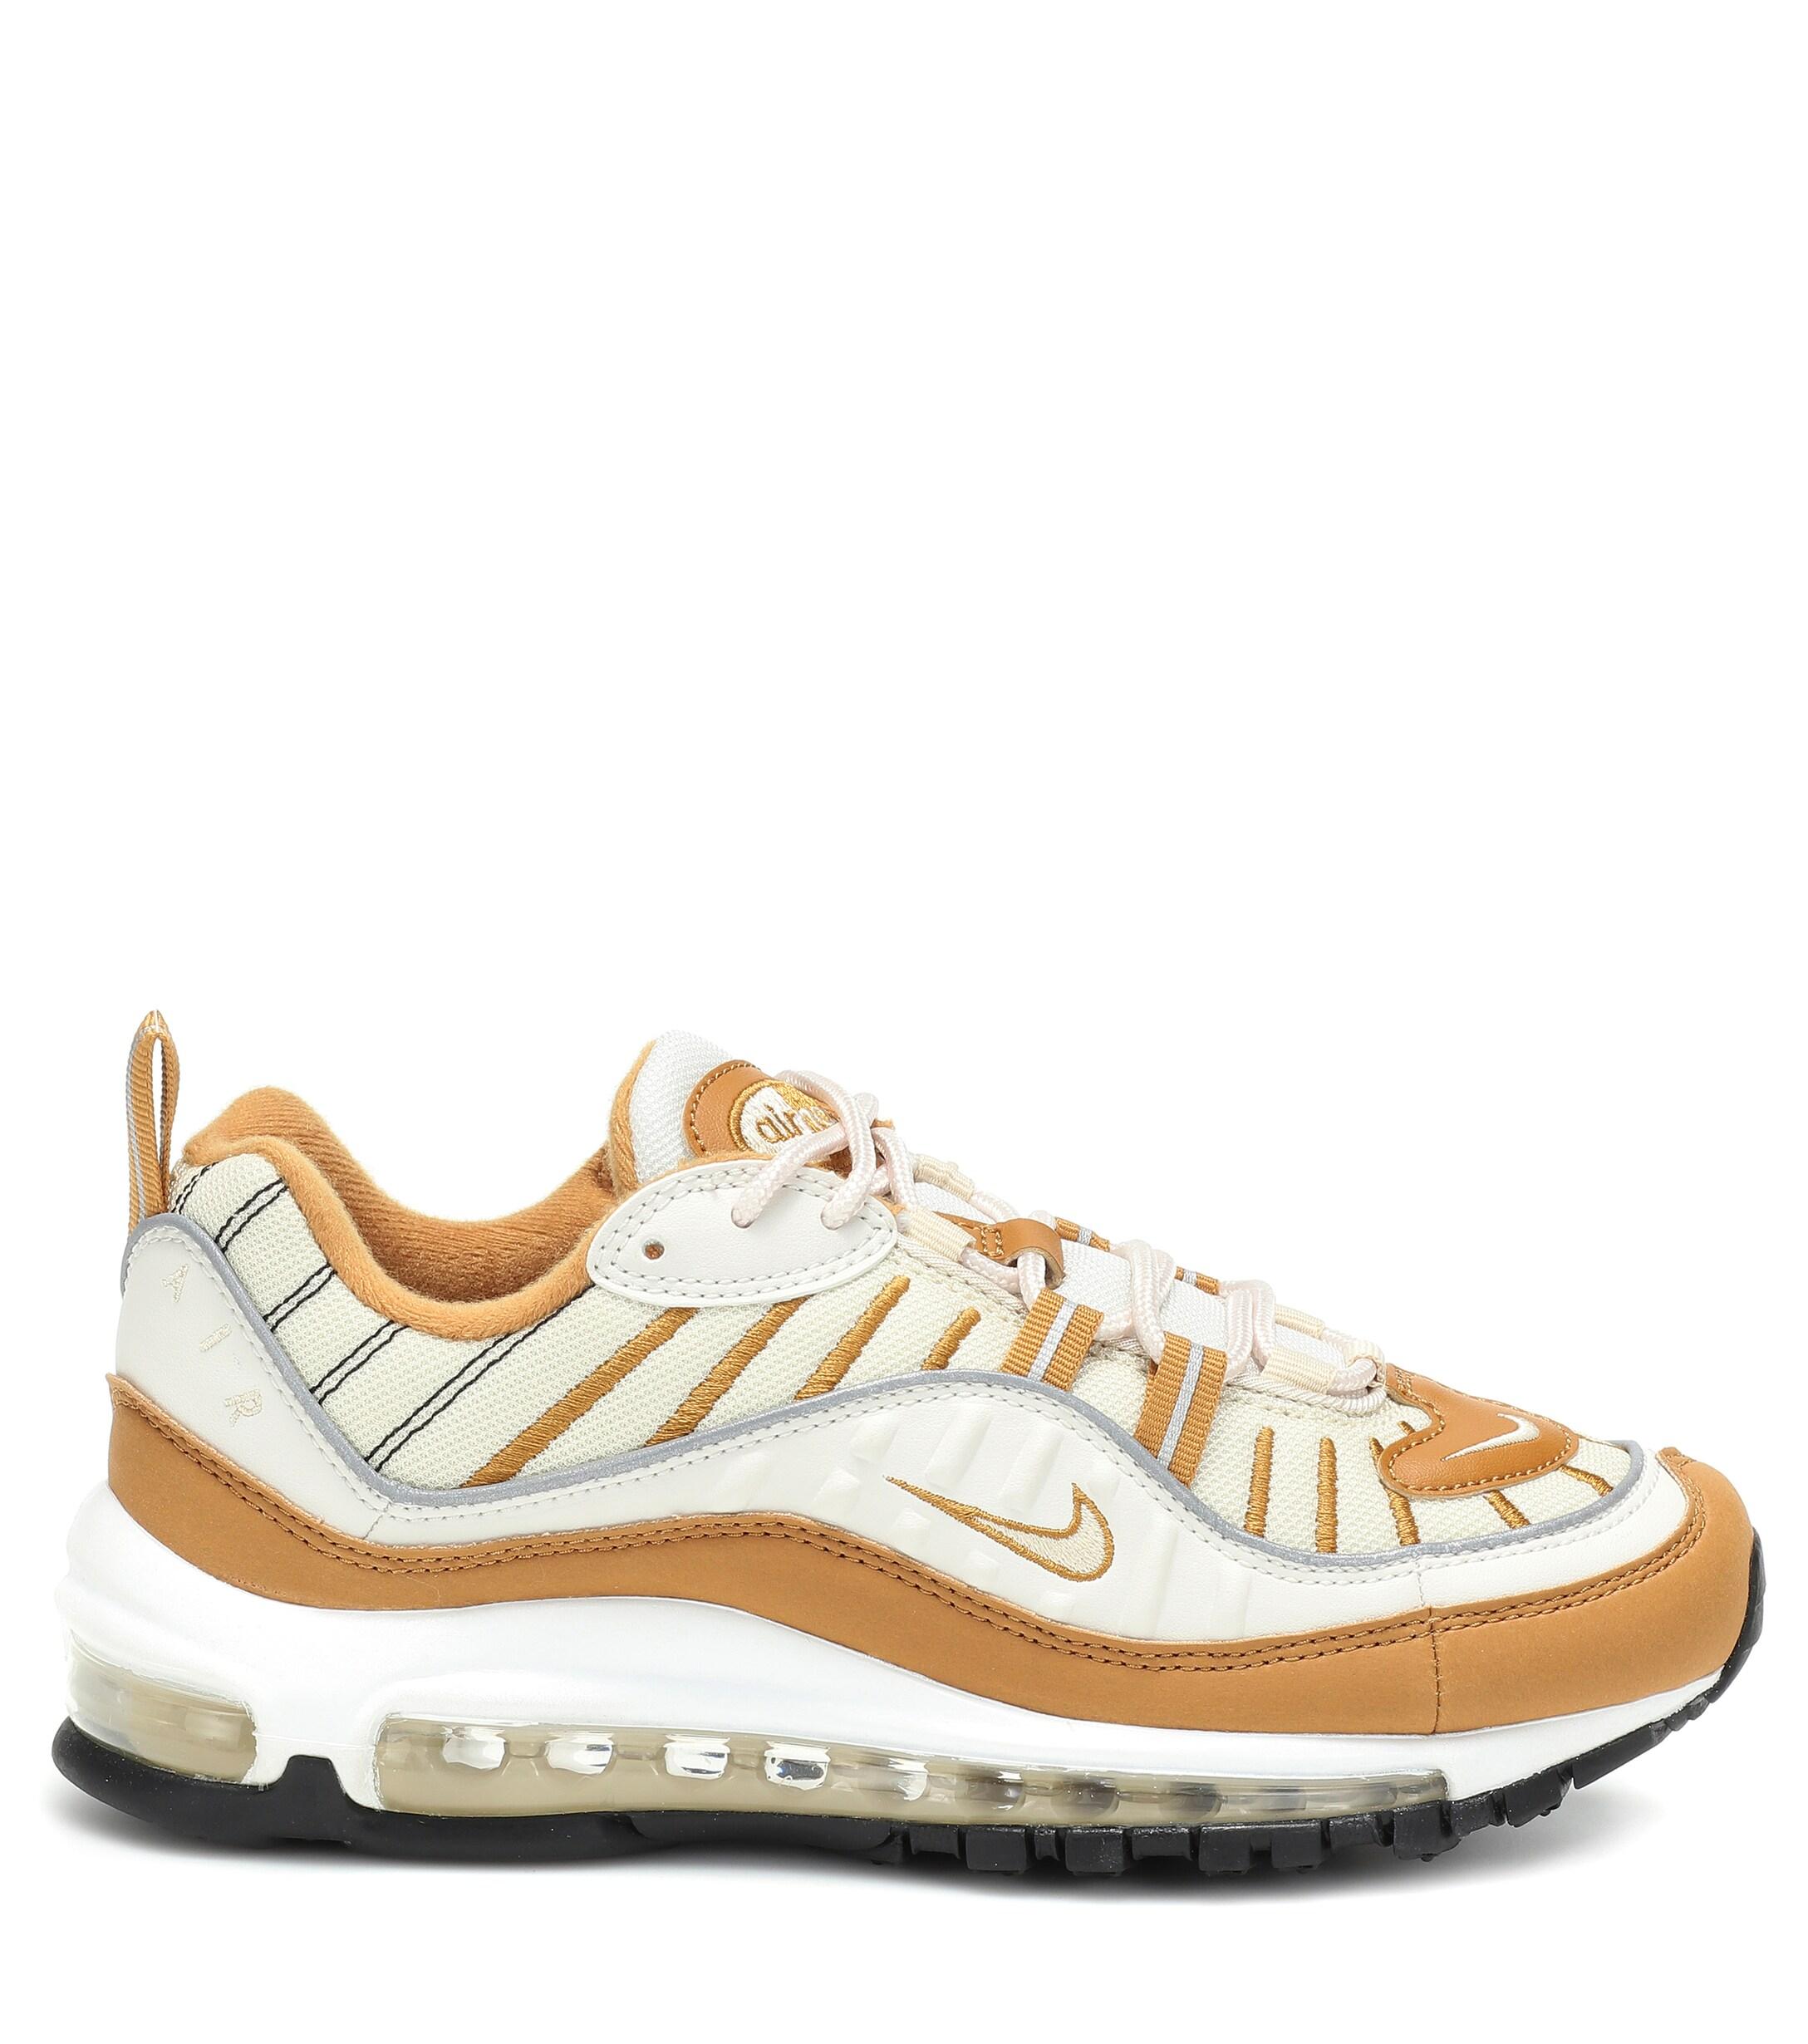 Nike Leather Wmns Air Max 98 in Beige 